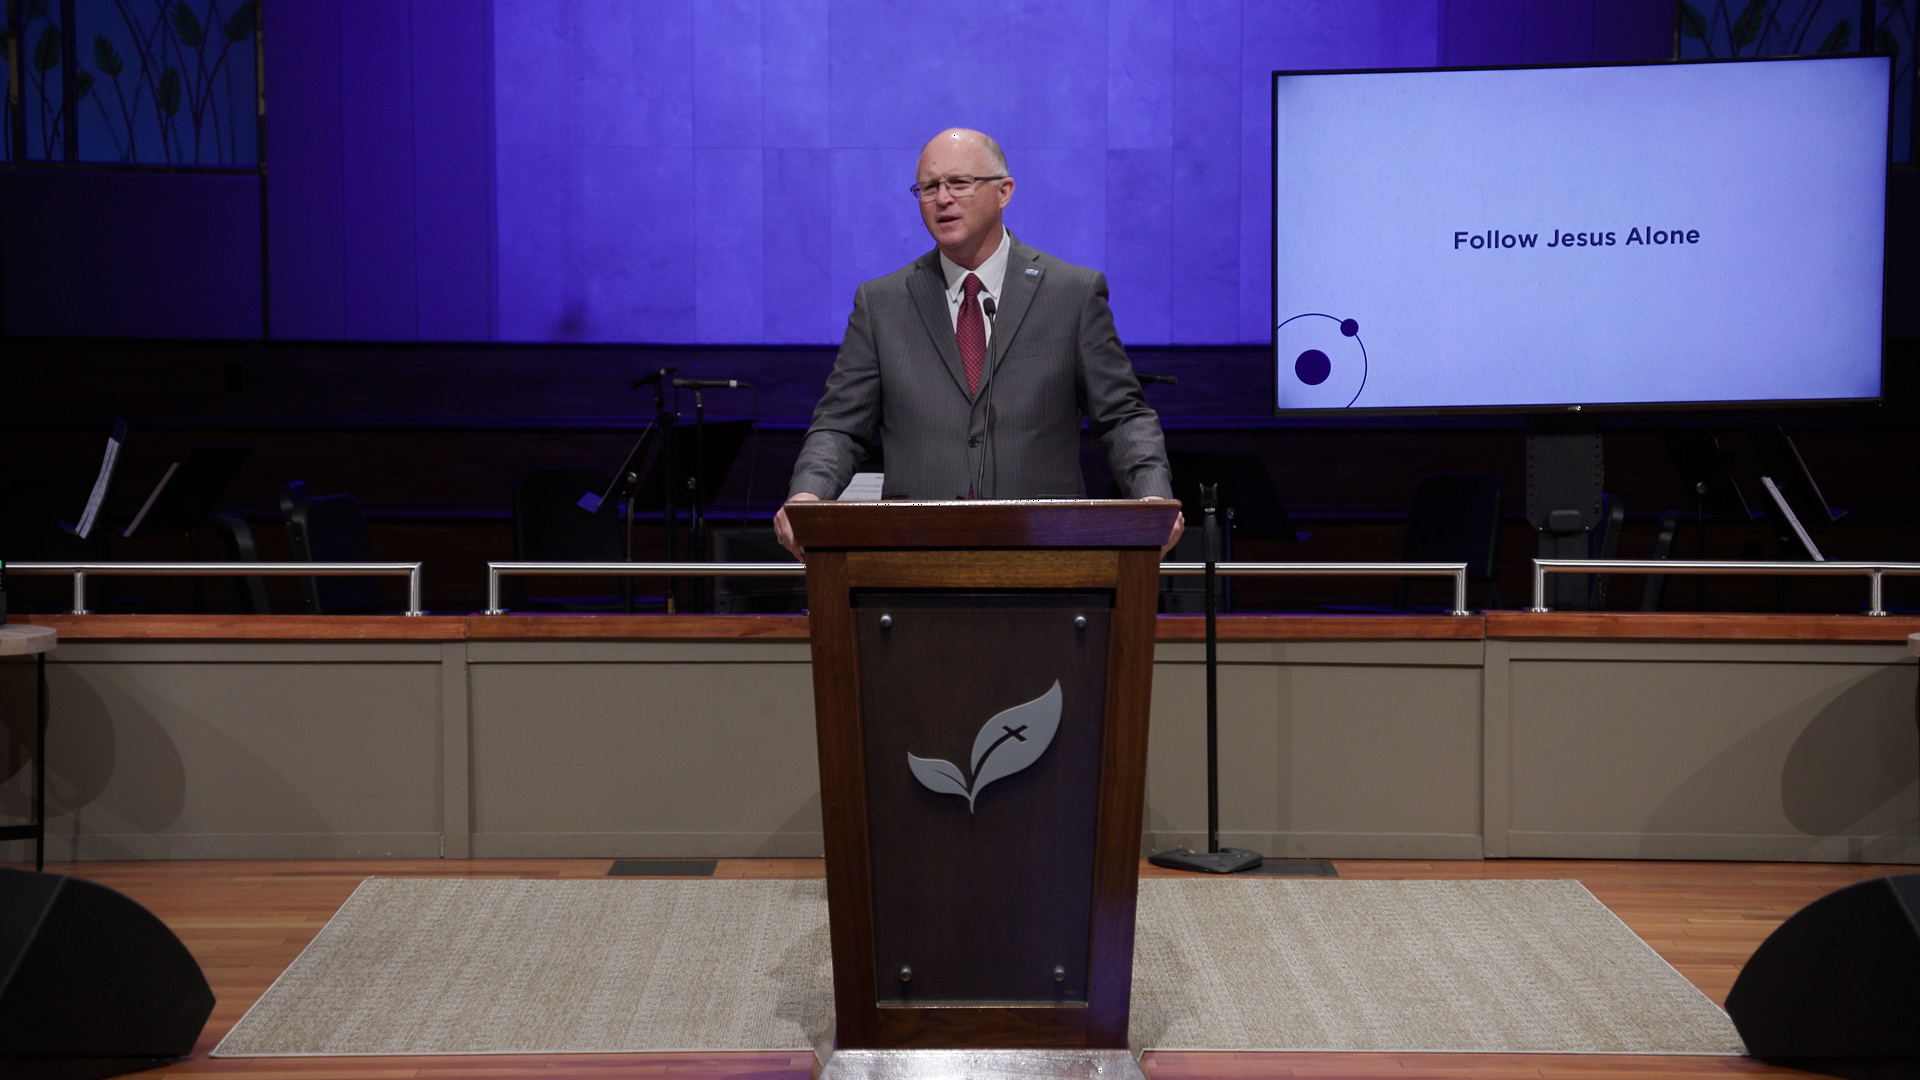 Pastor Paul Chappell: Loving Children and Following Jesus